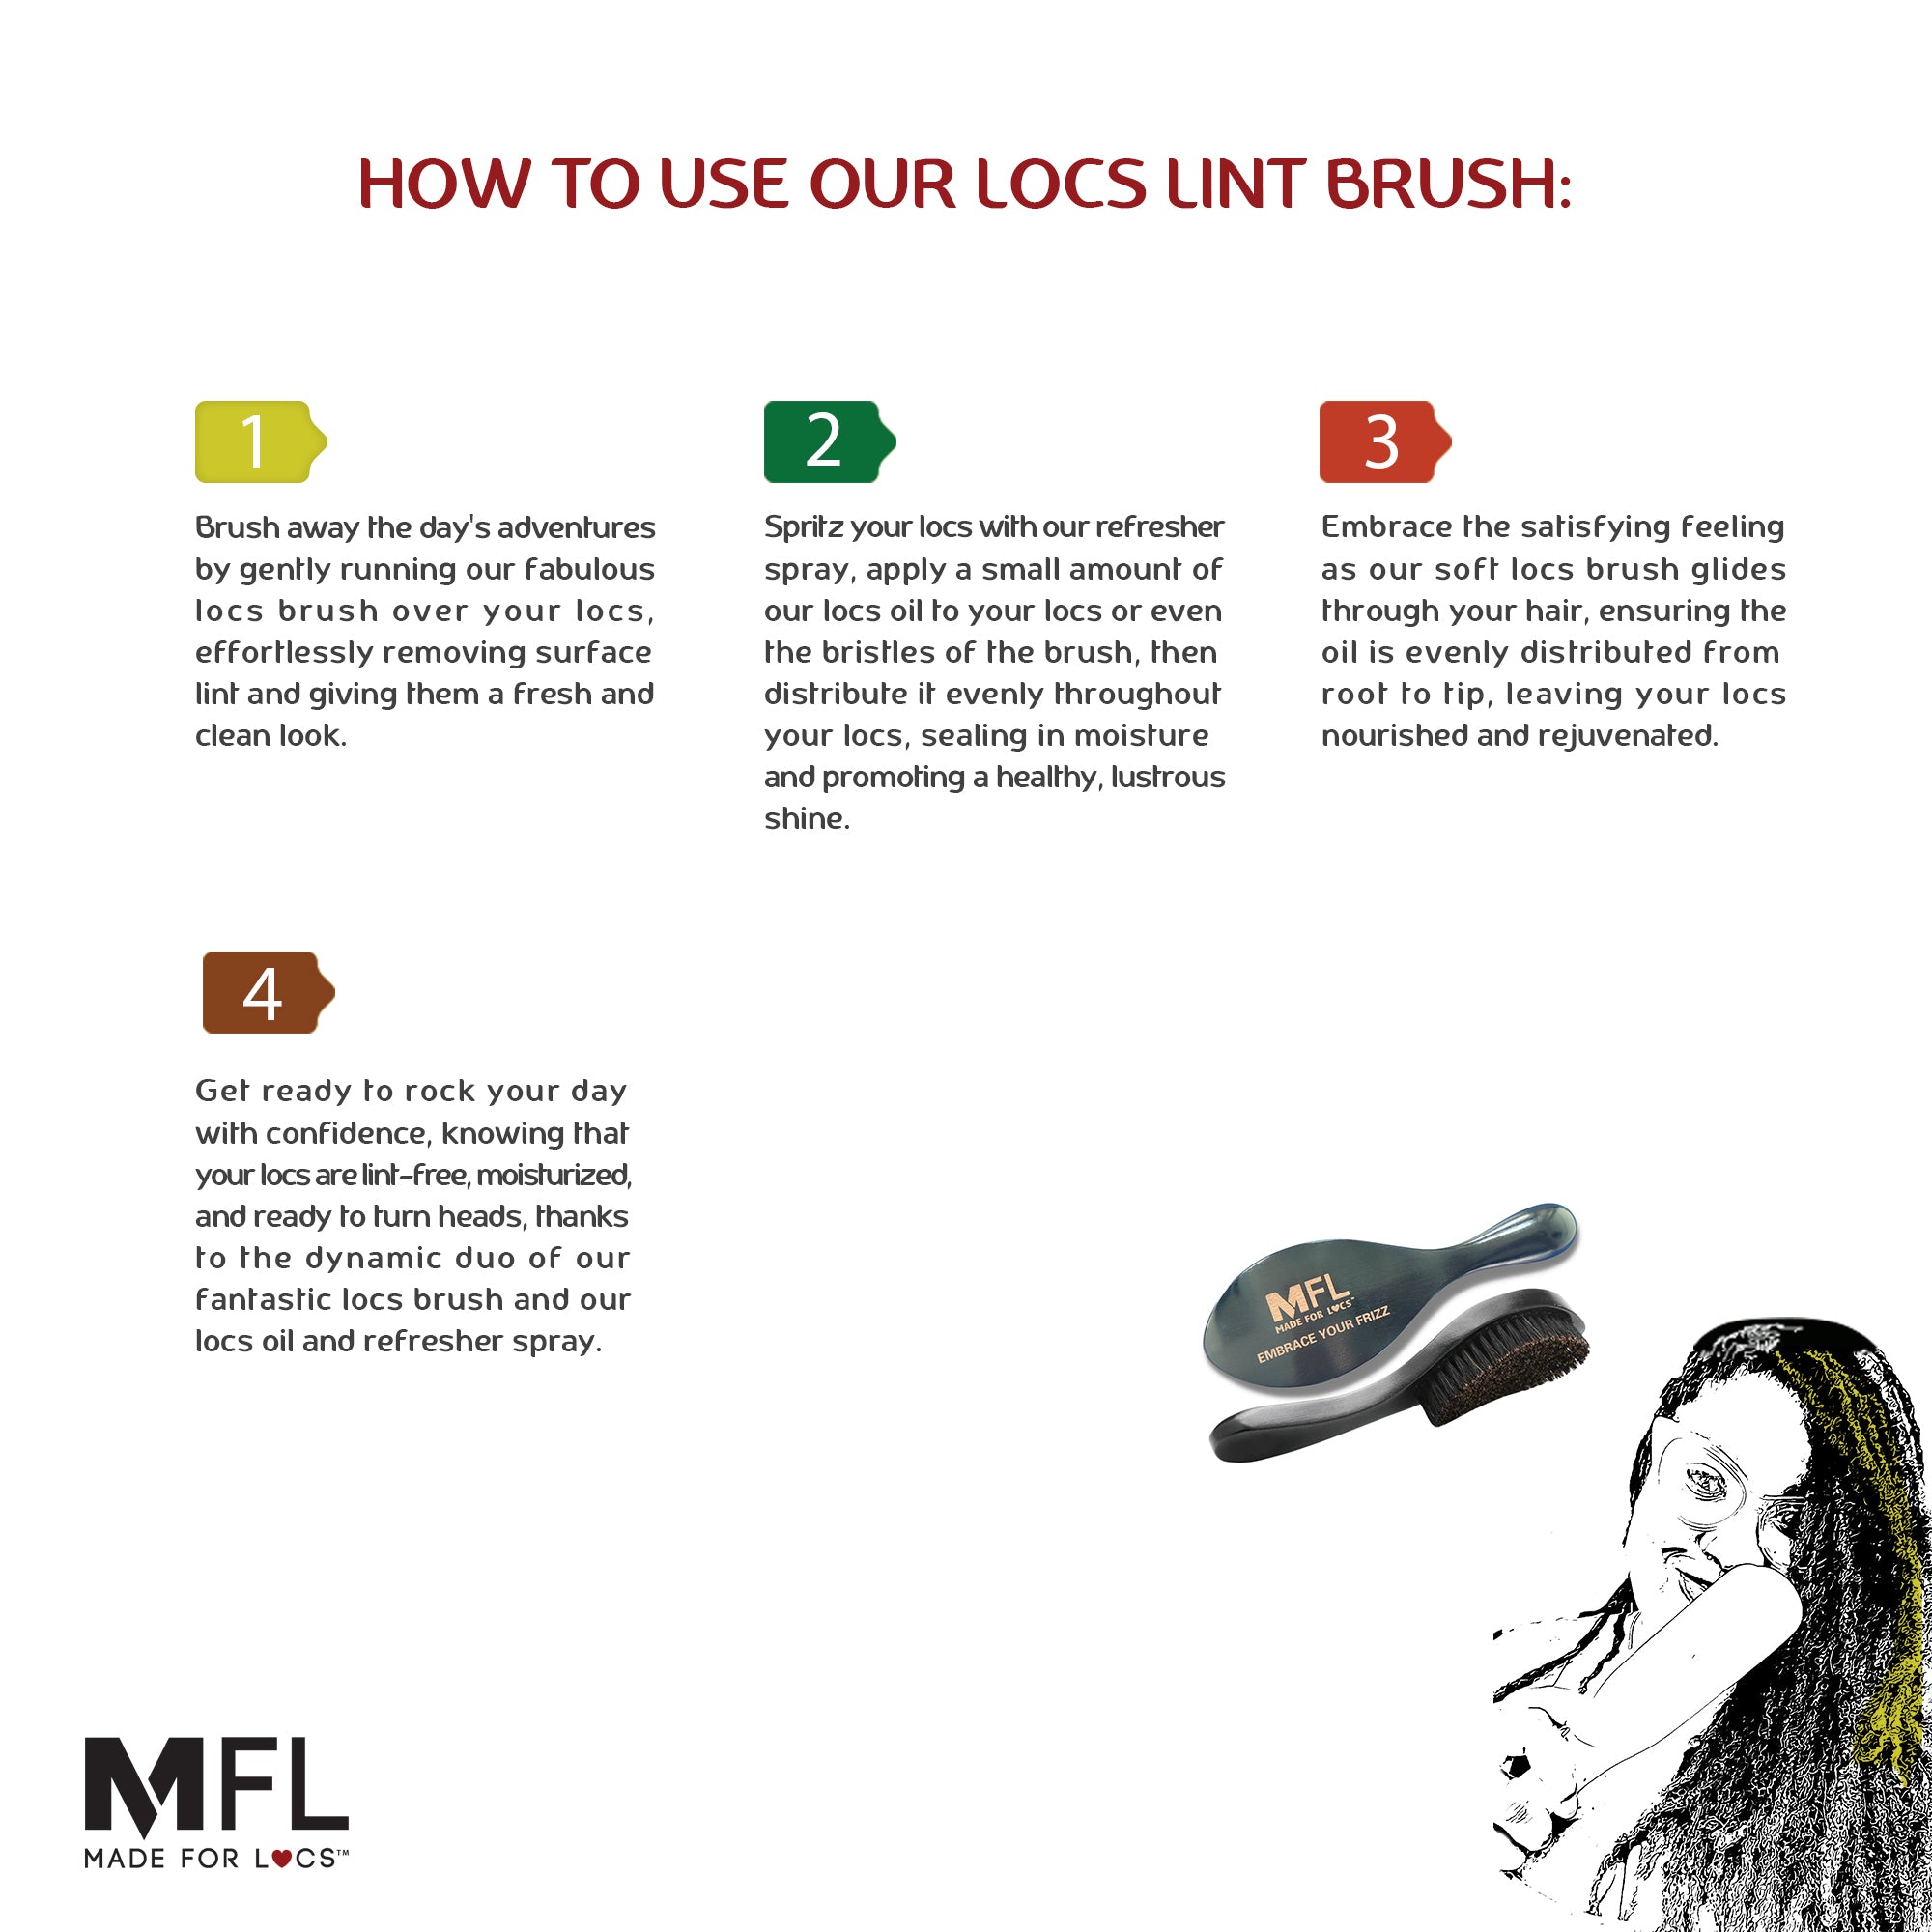 HOW TO BRUSH YOUR LOCS